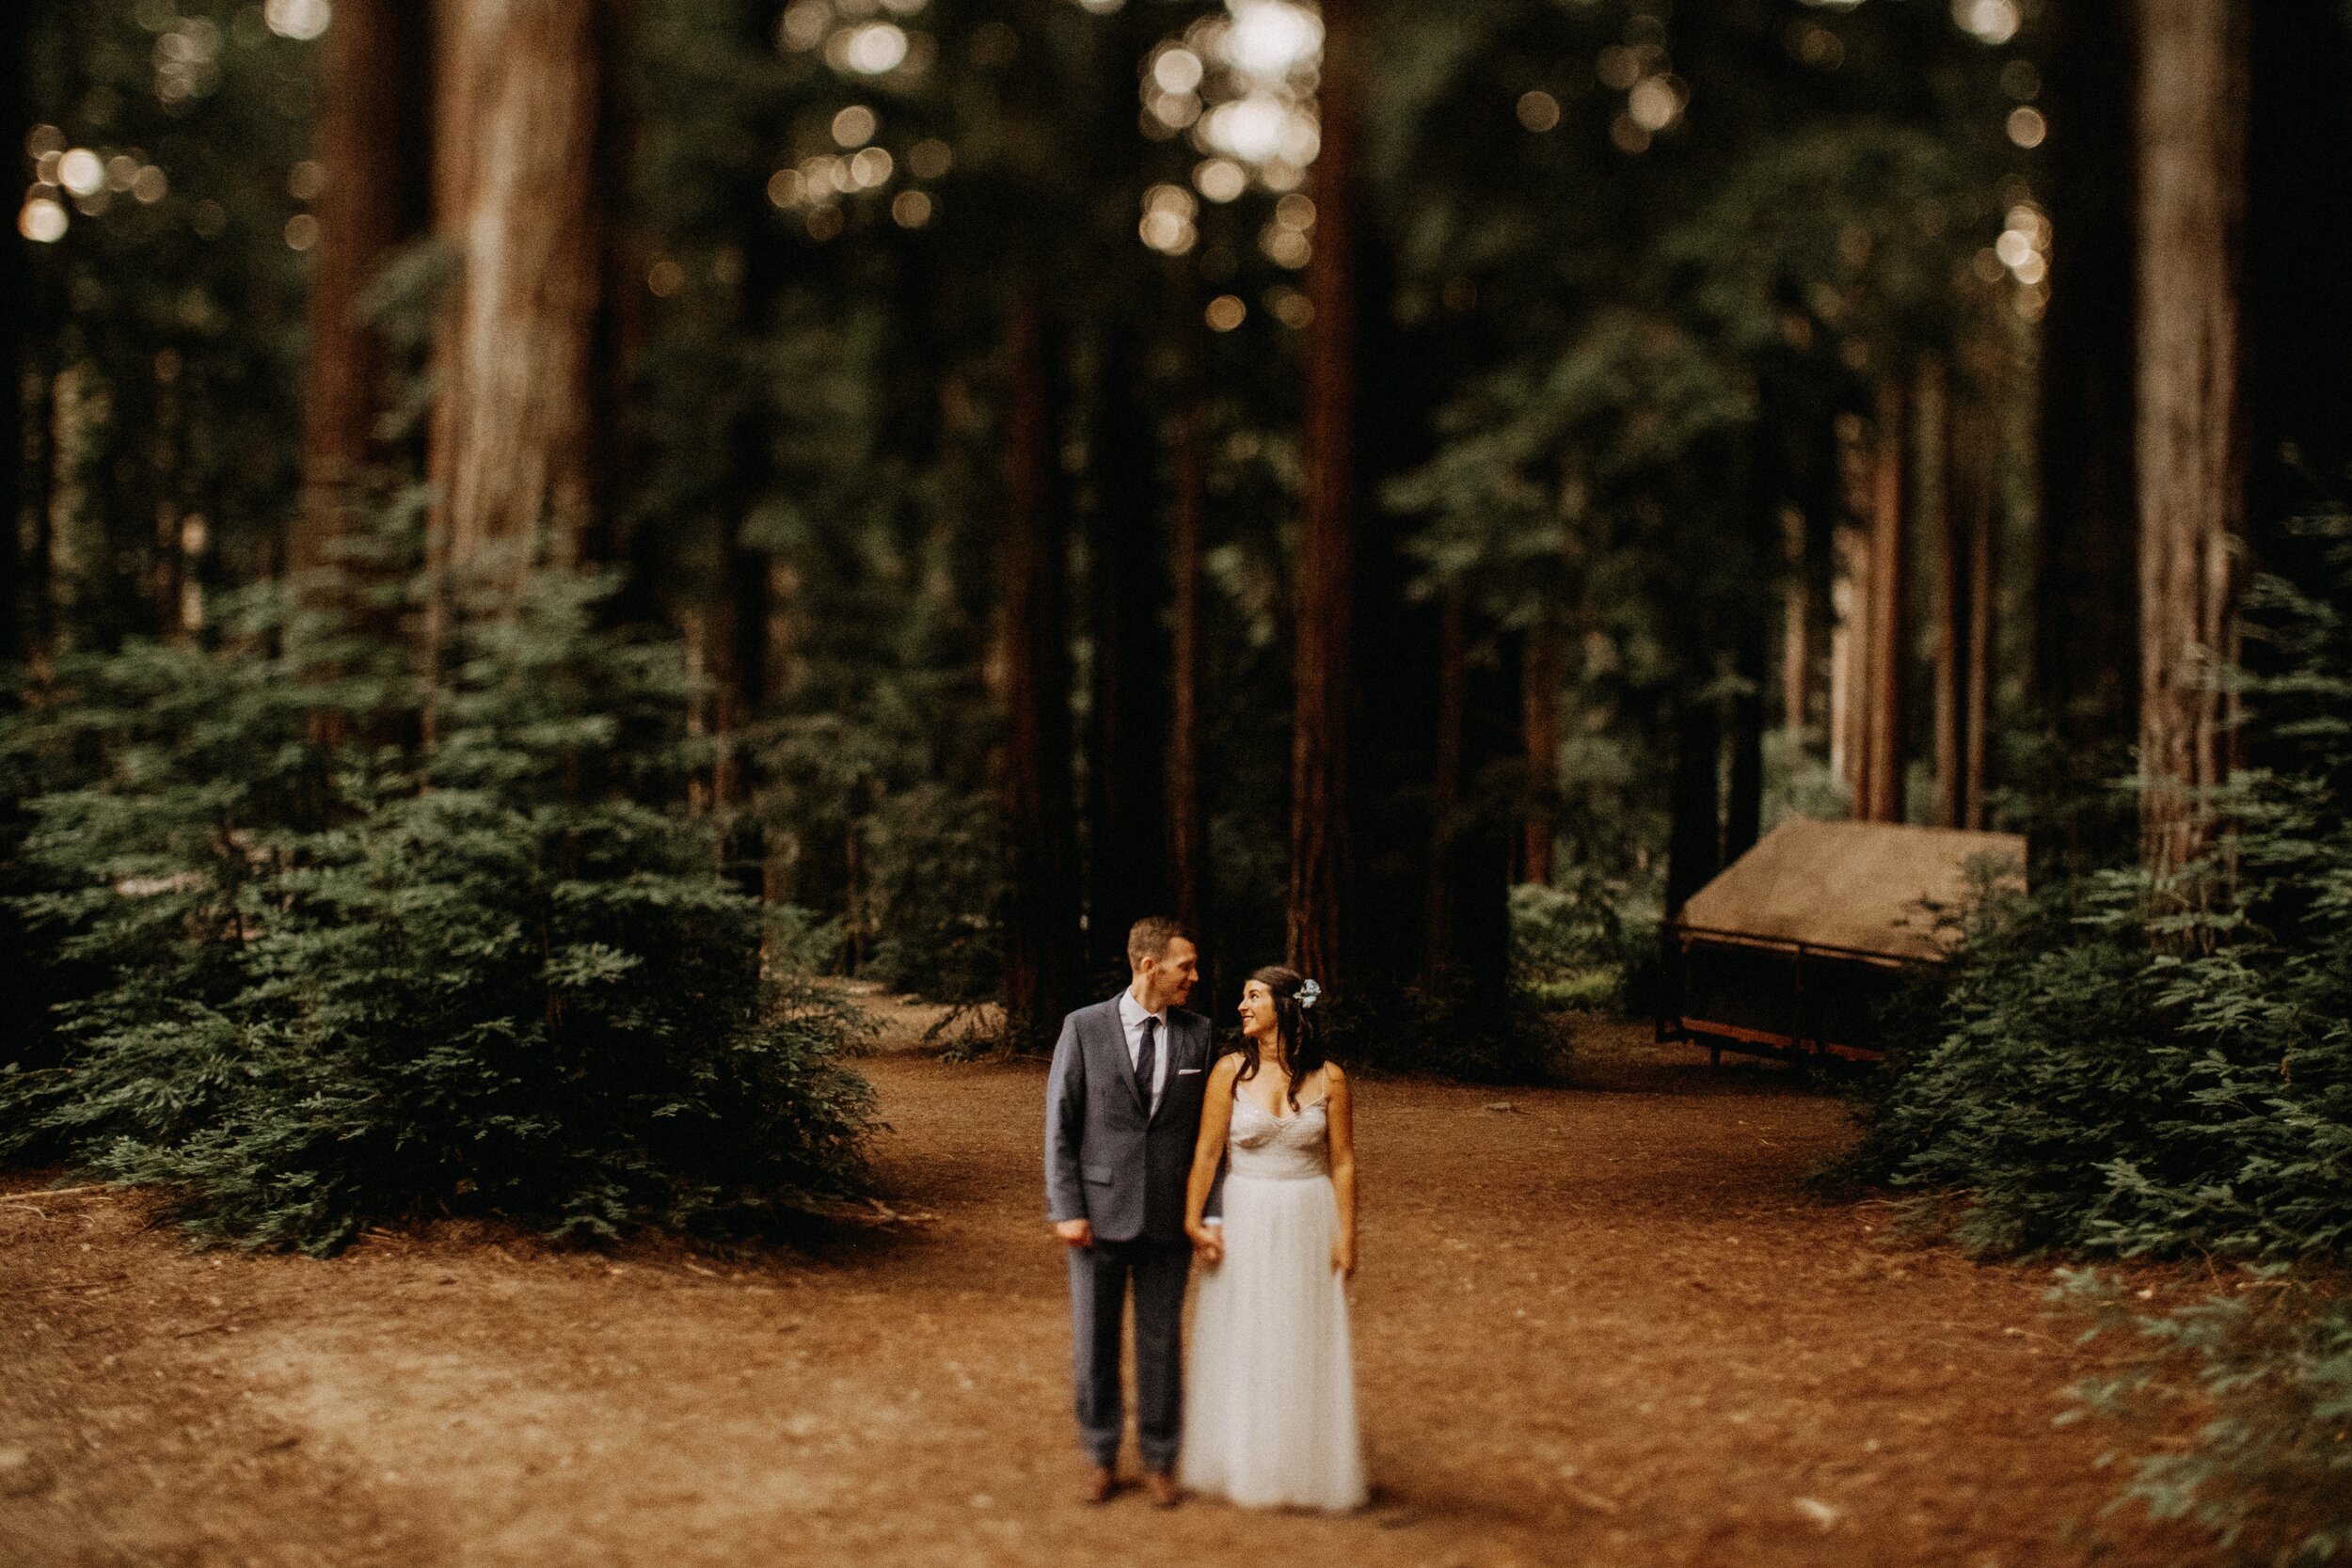 Jenni Grubba Events Bay area wedding planner norcal camp forest wedding redwoods